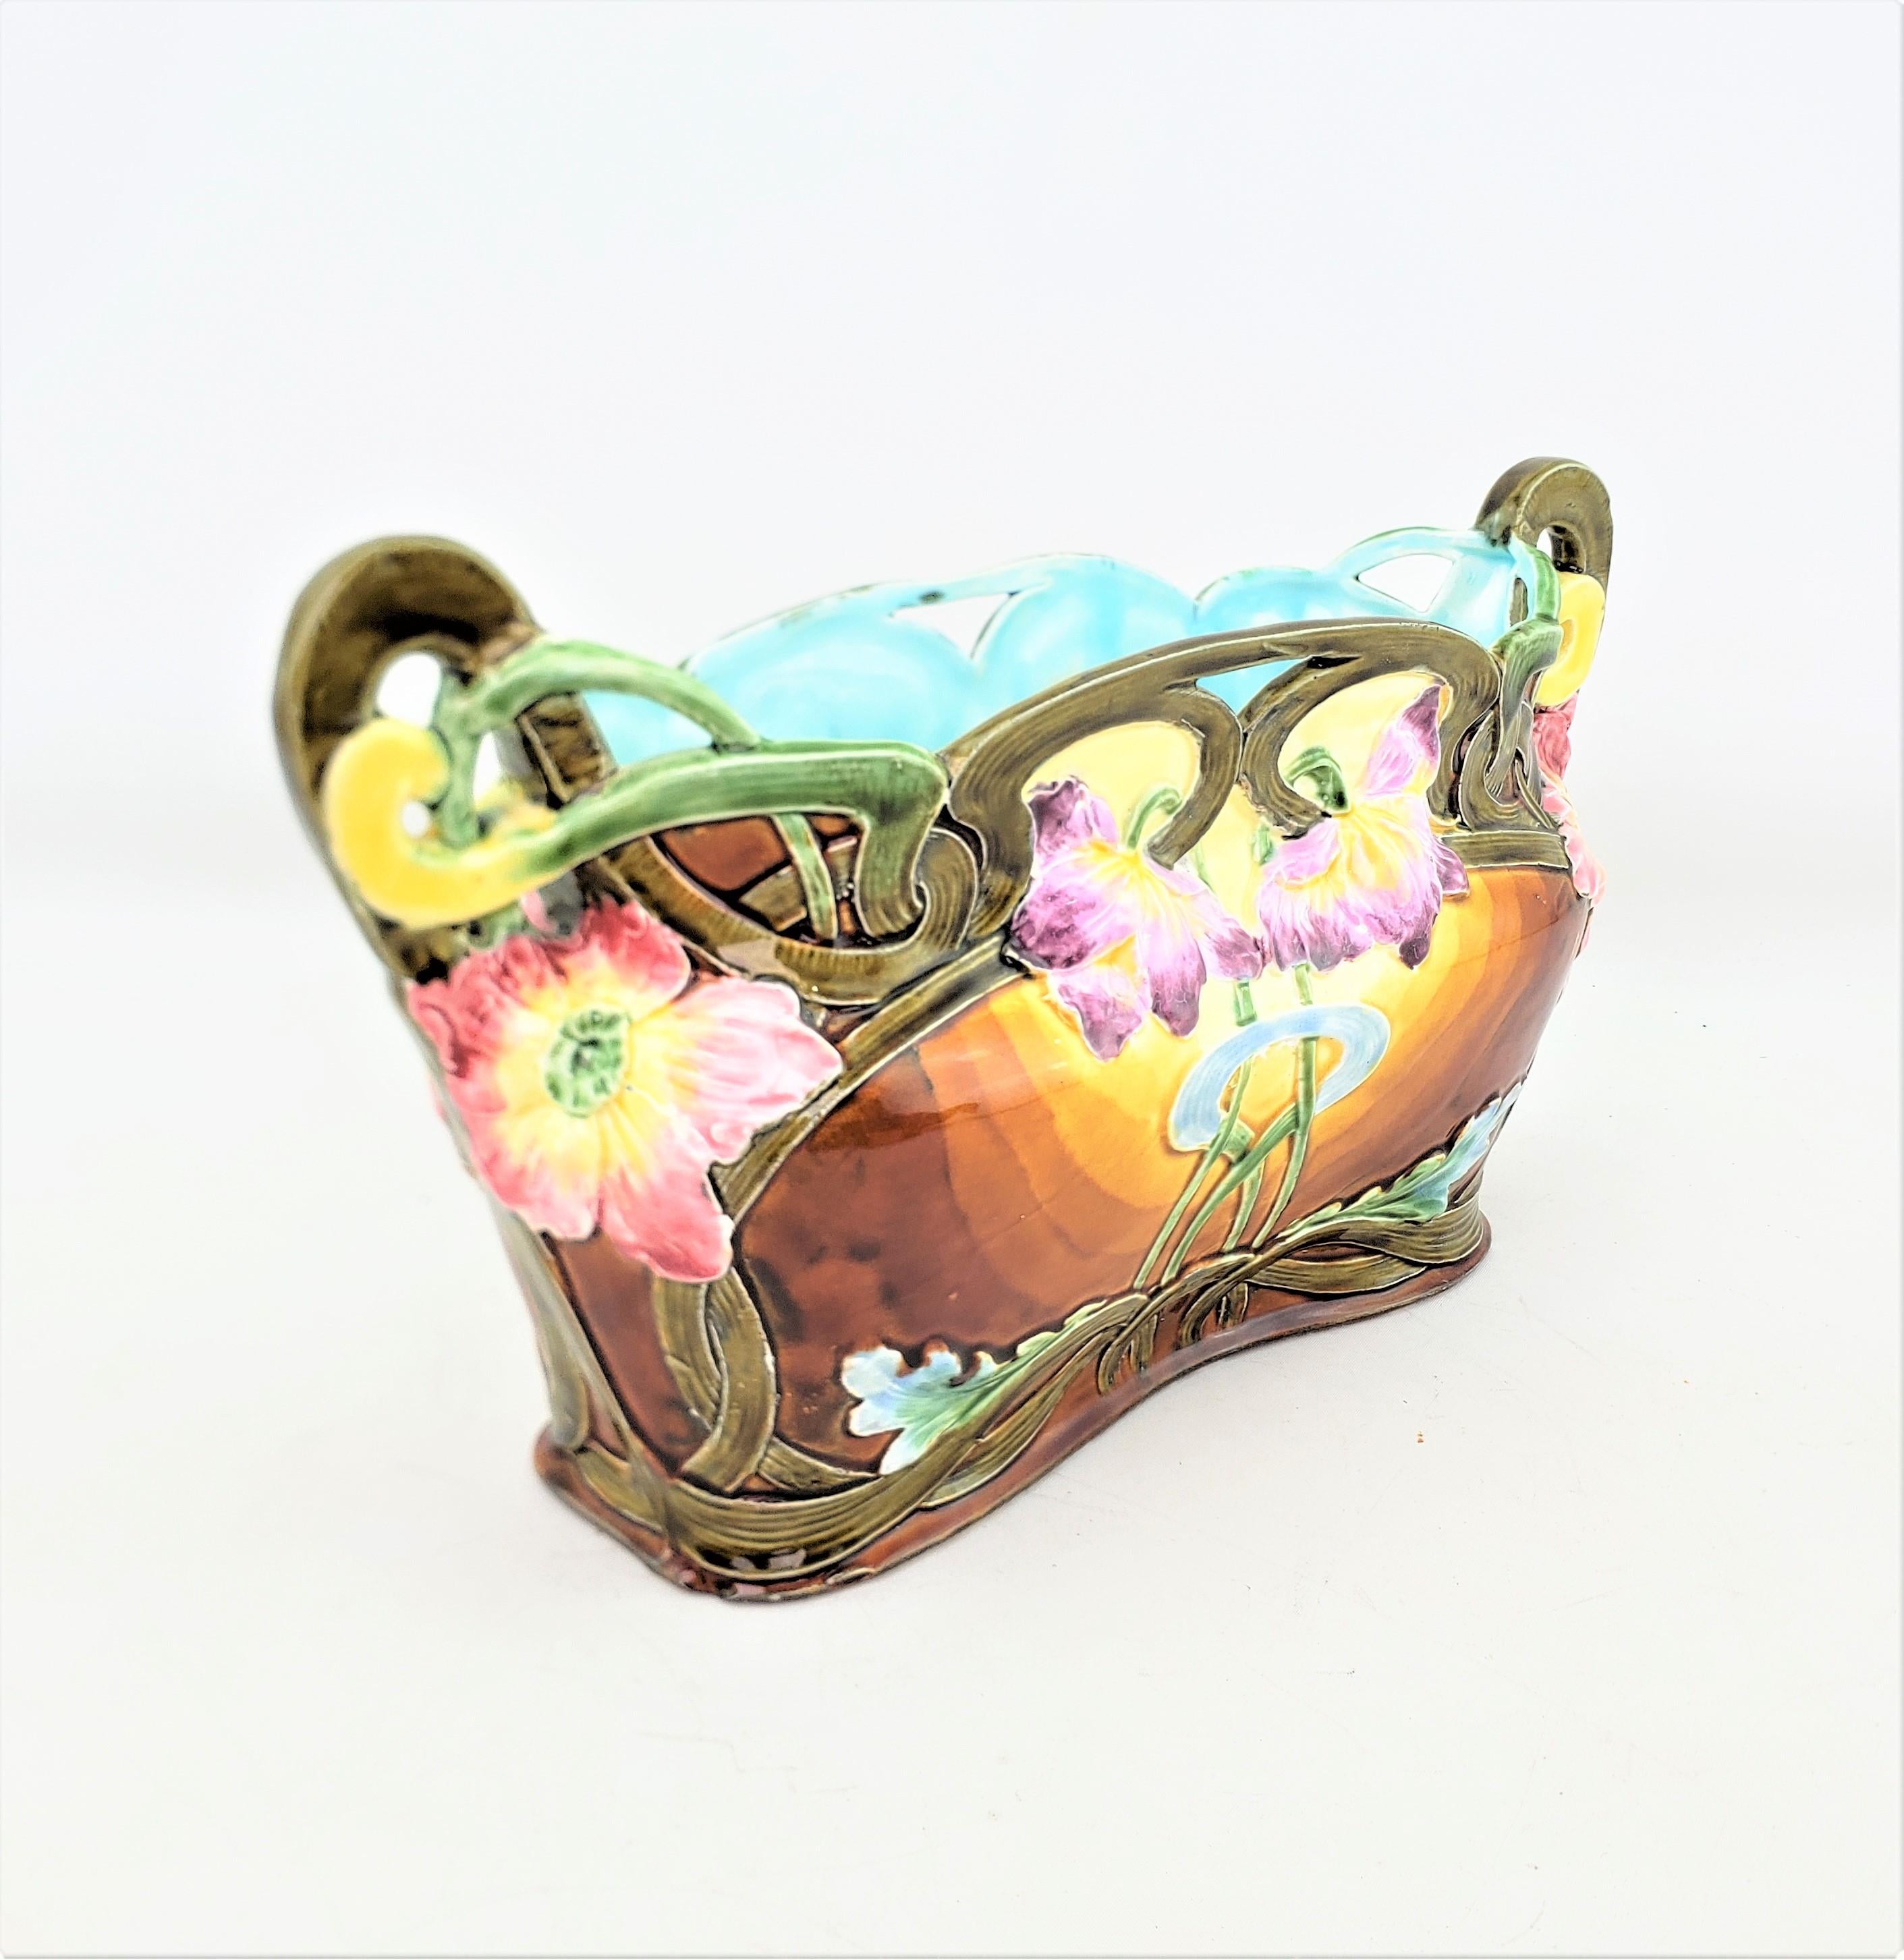 This antique planter is unsigned, but presumed to have originated from England and date to approximately 1890 and done in the period Art Nouveau style. The planter is composed of Majolica and done in a figural flower basket shape with vibrant floral